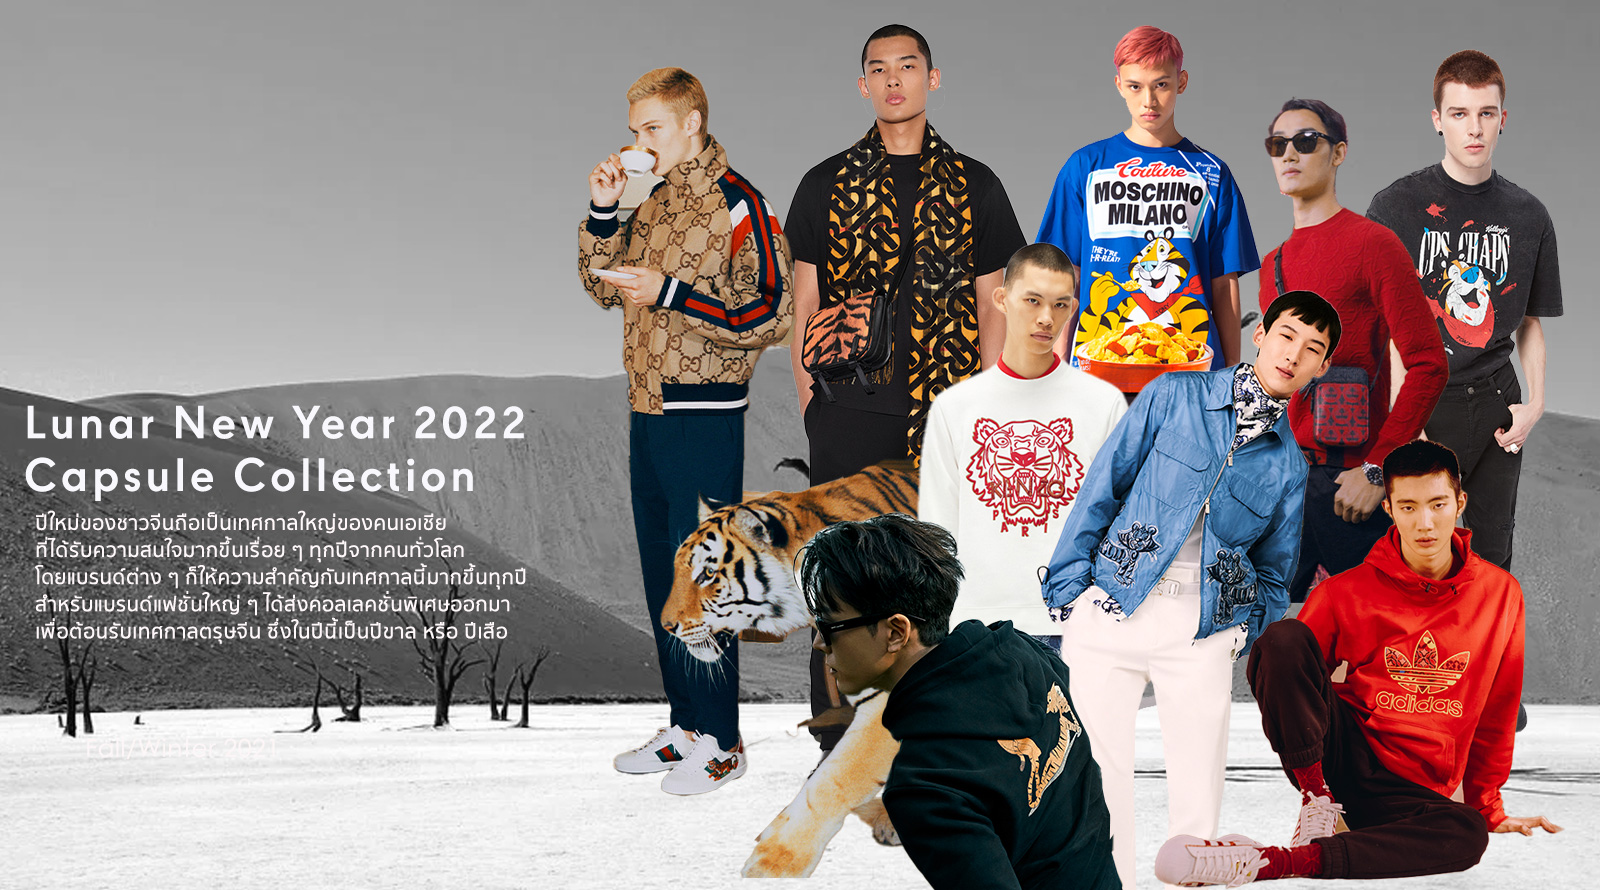 Lunar New Year 2022 - Capsule Collection